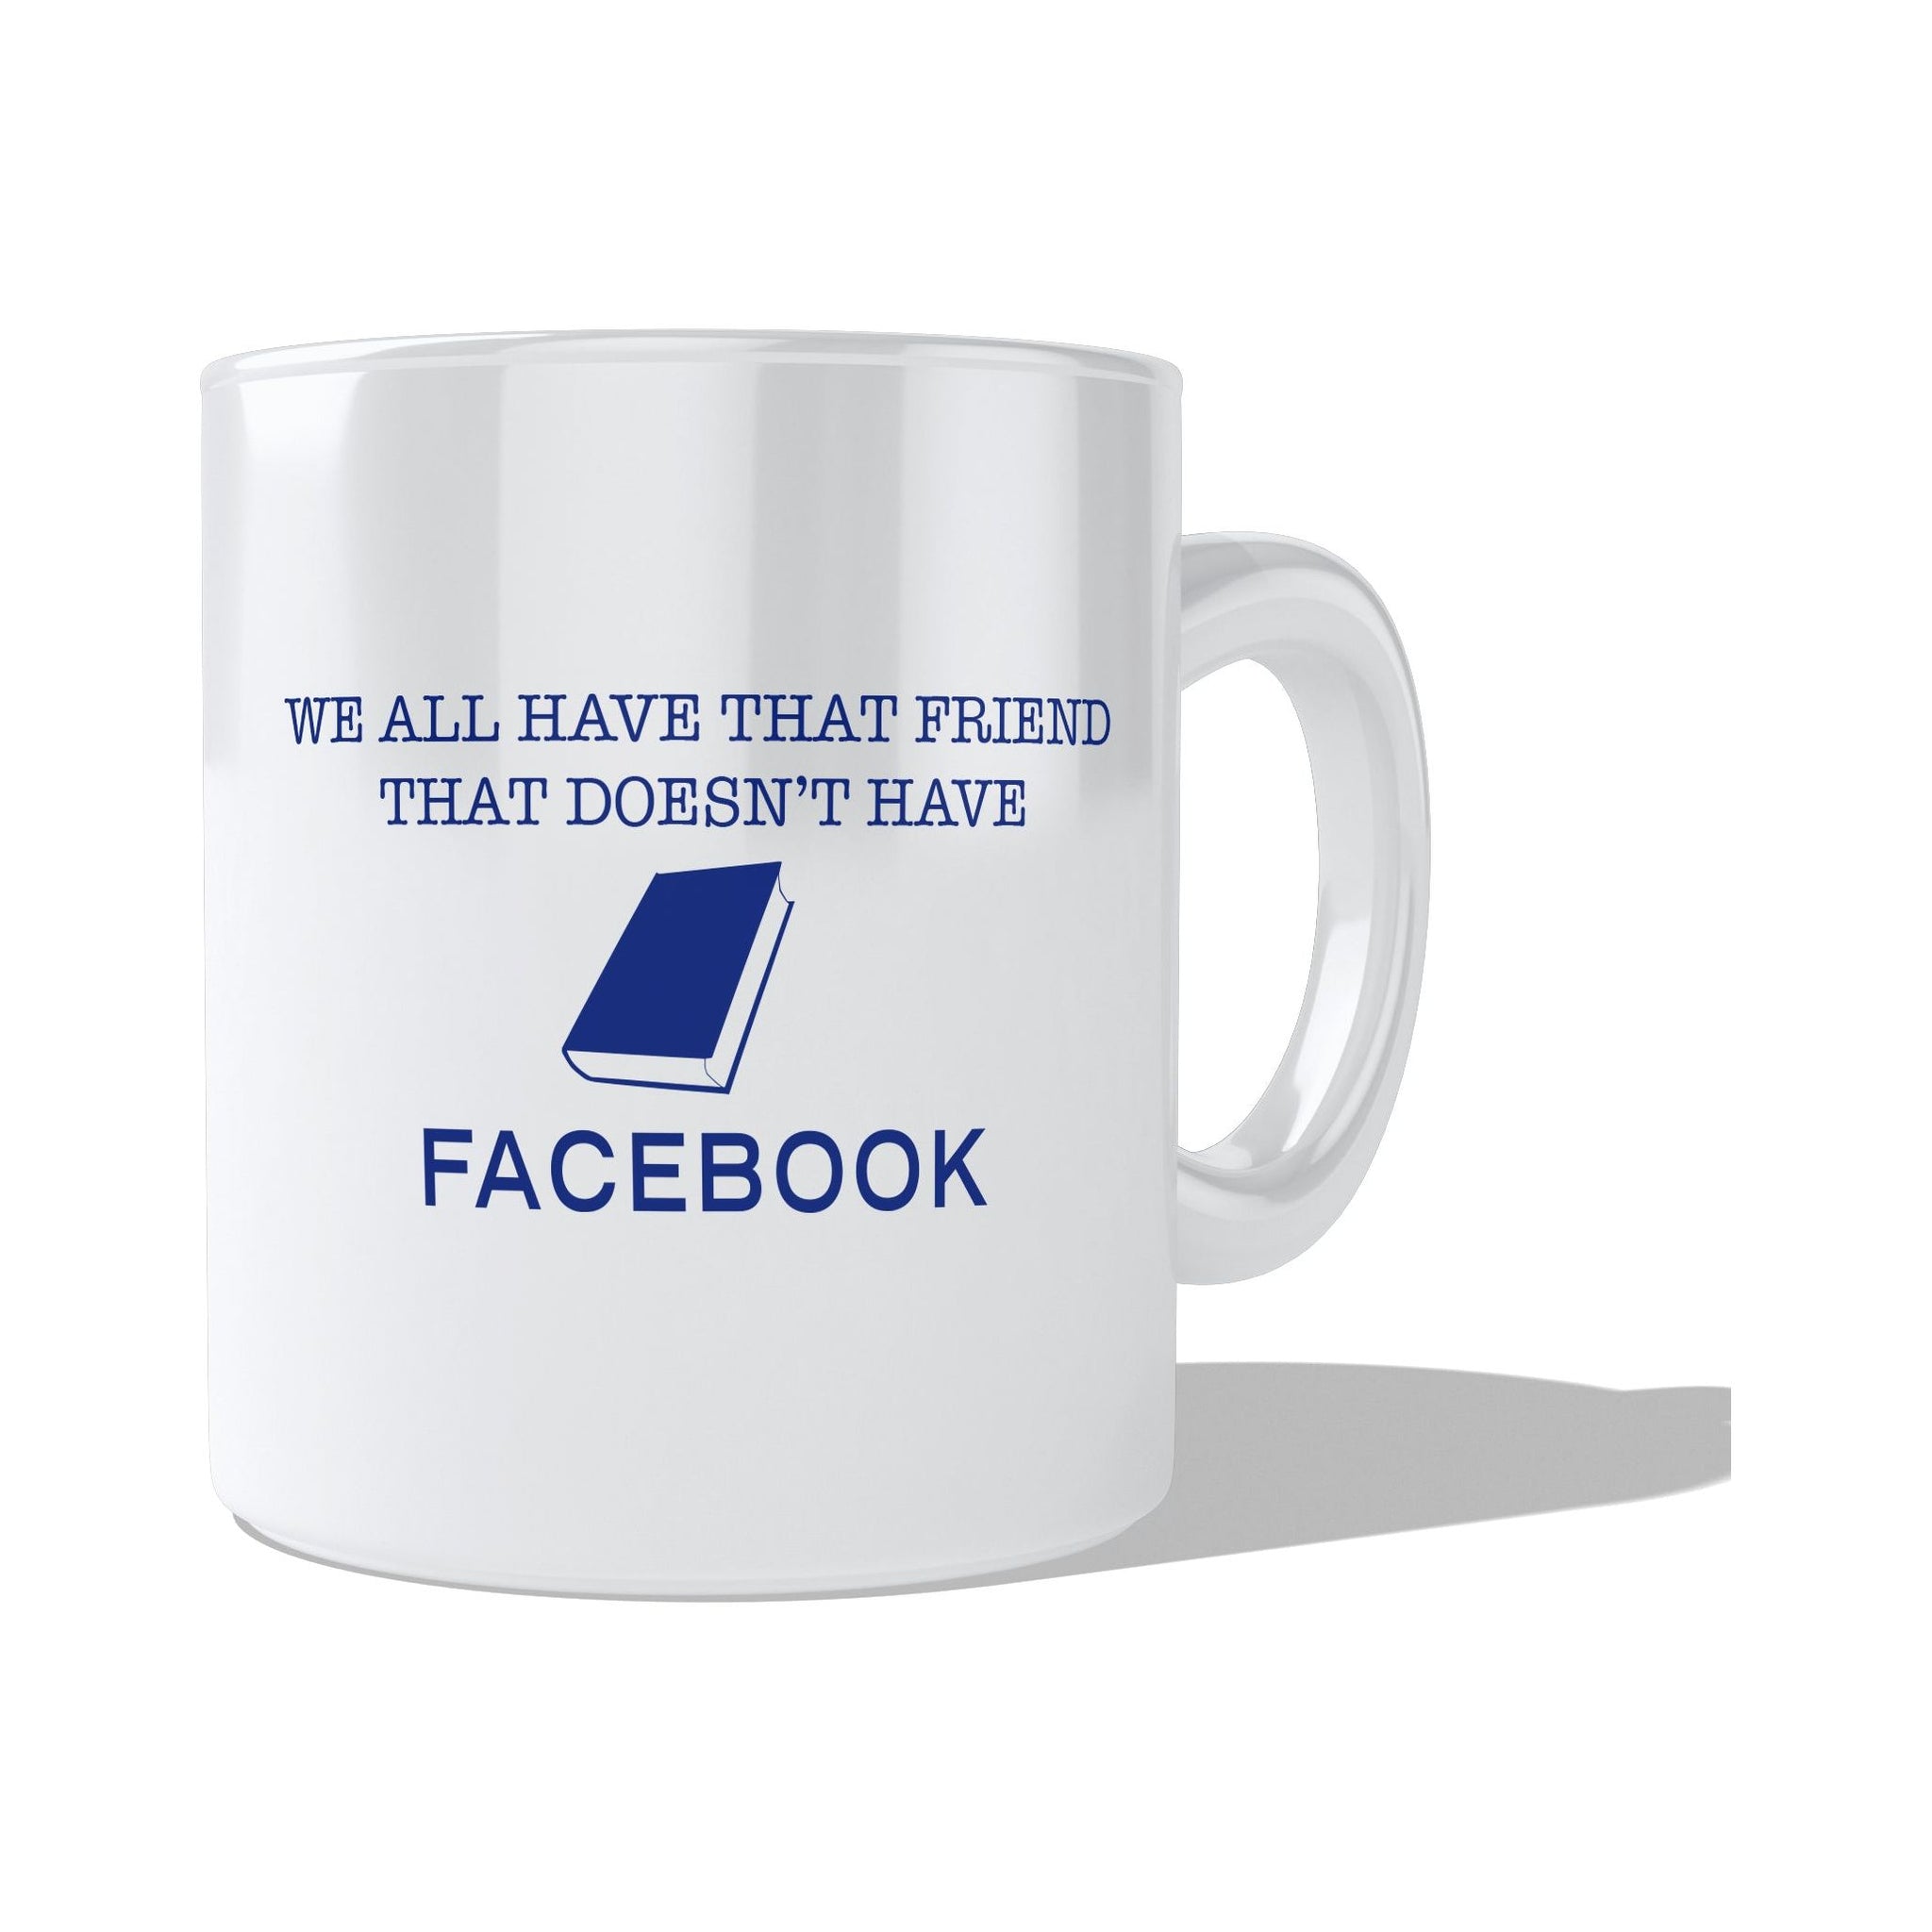 We all know someone who doesn't have Facebook  Coffee and Tea Ceramic  Mug 11oz